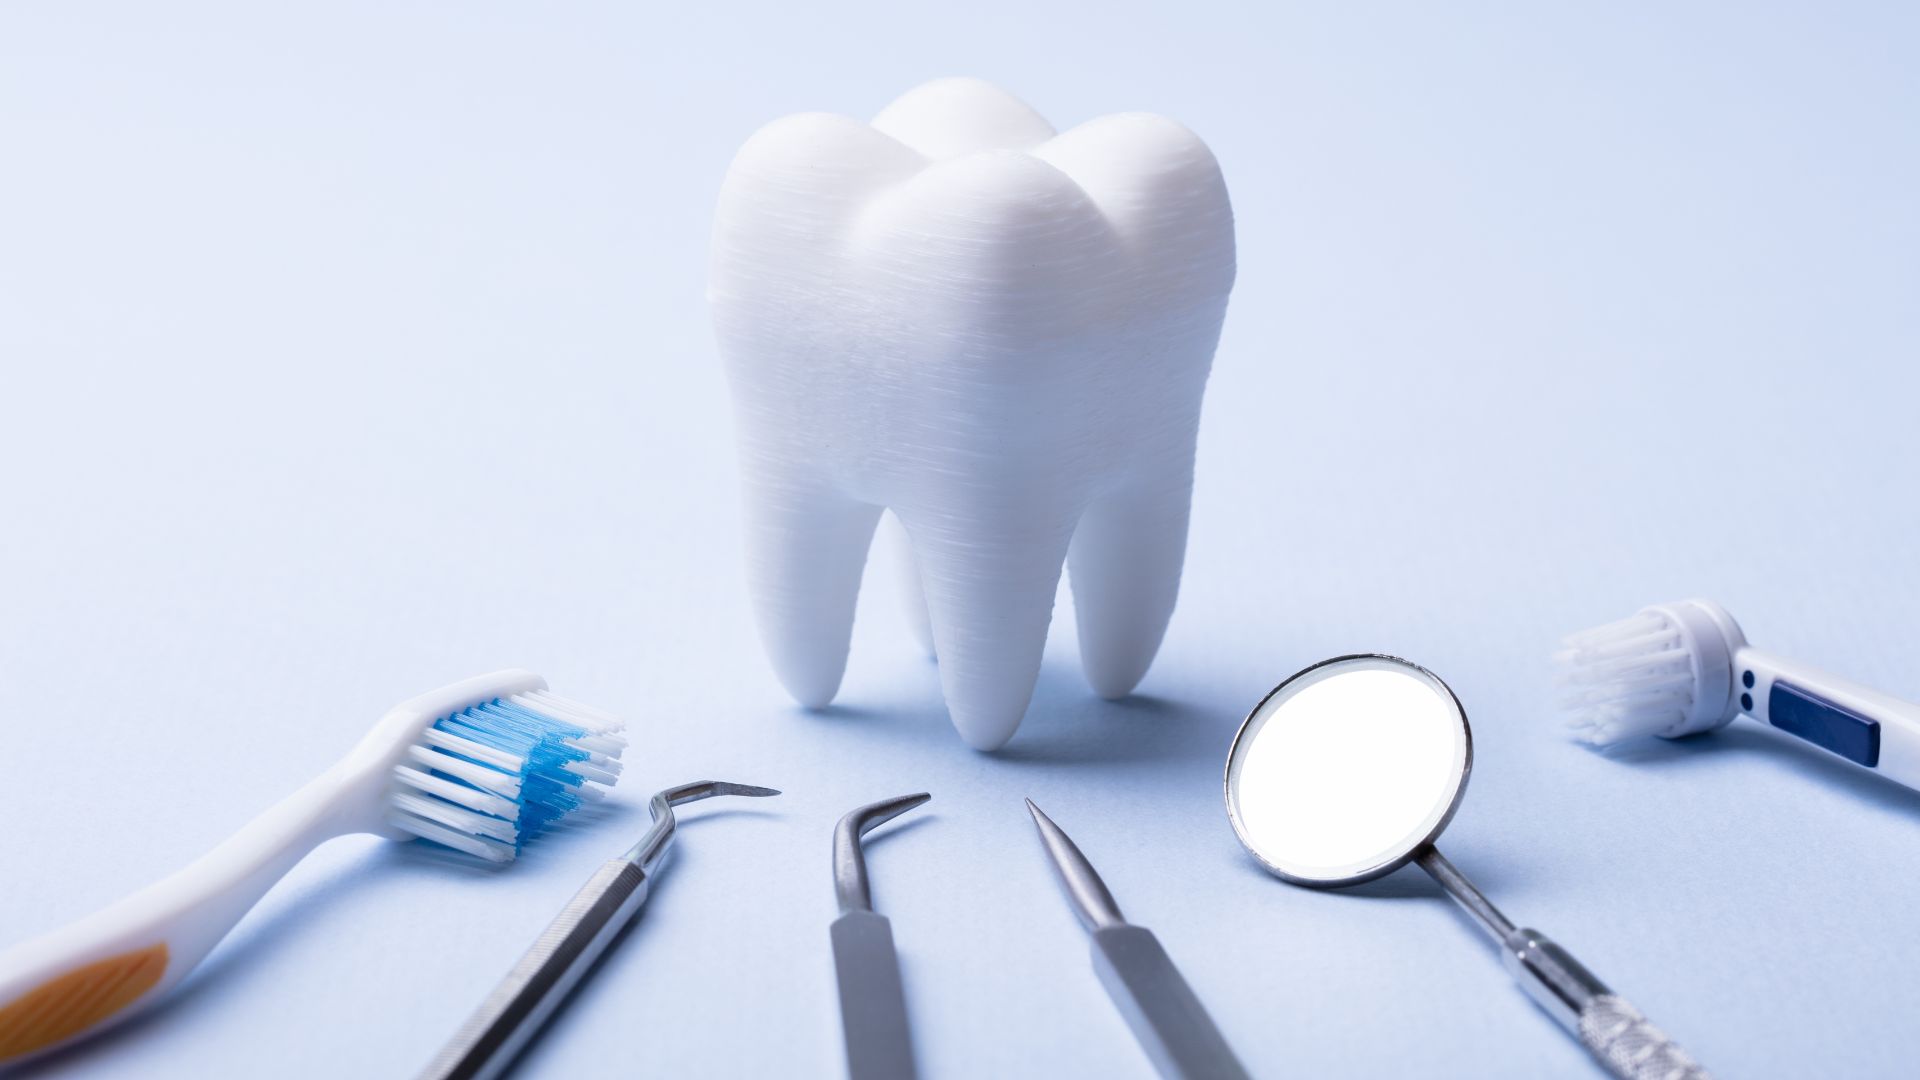 Dental Tools Around A Large Tooth Model